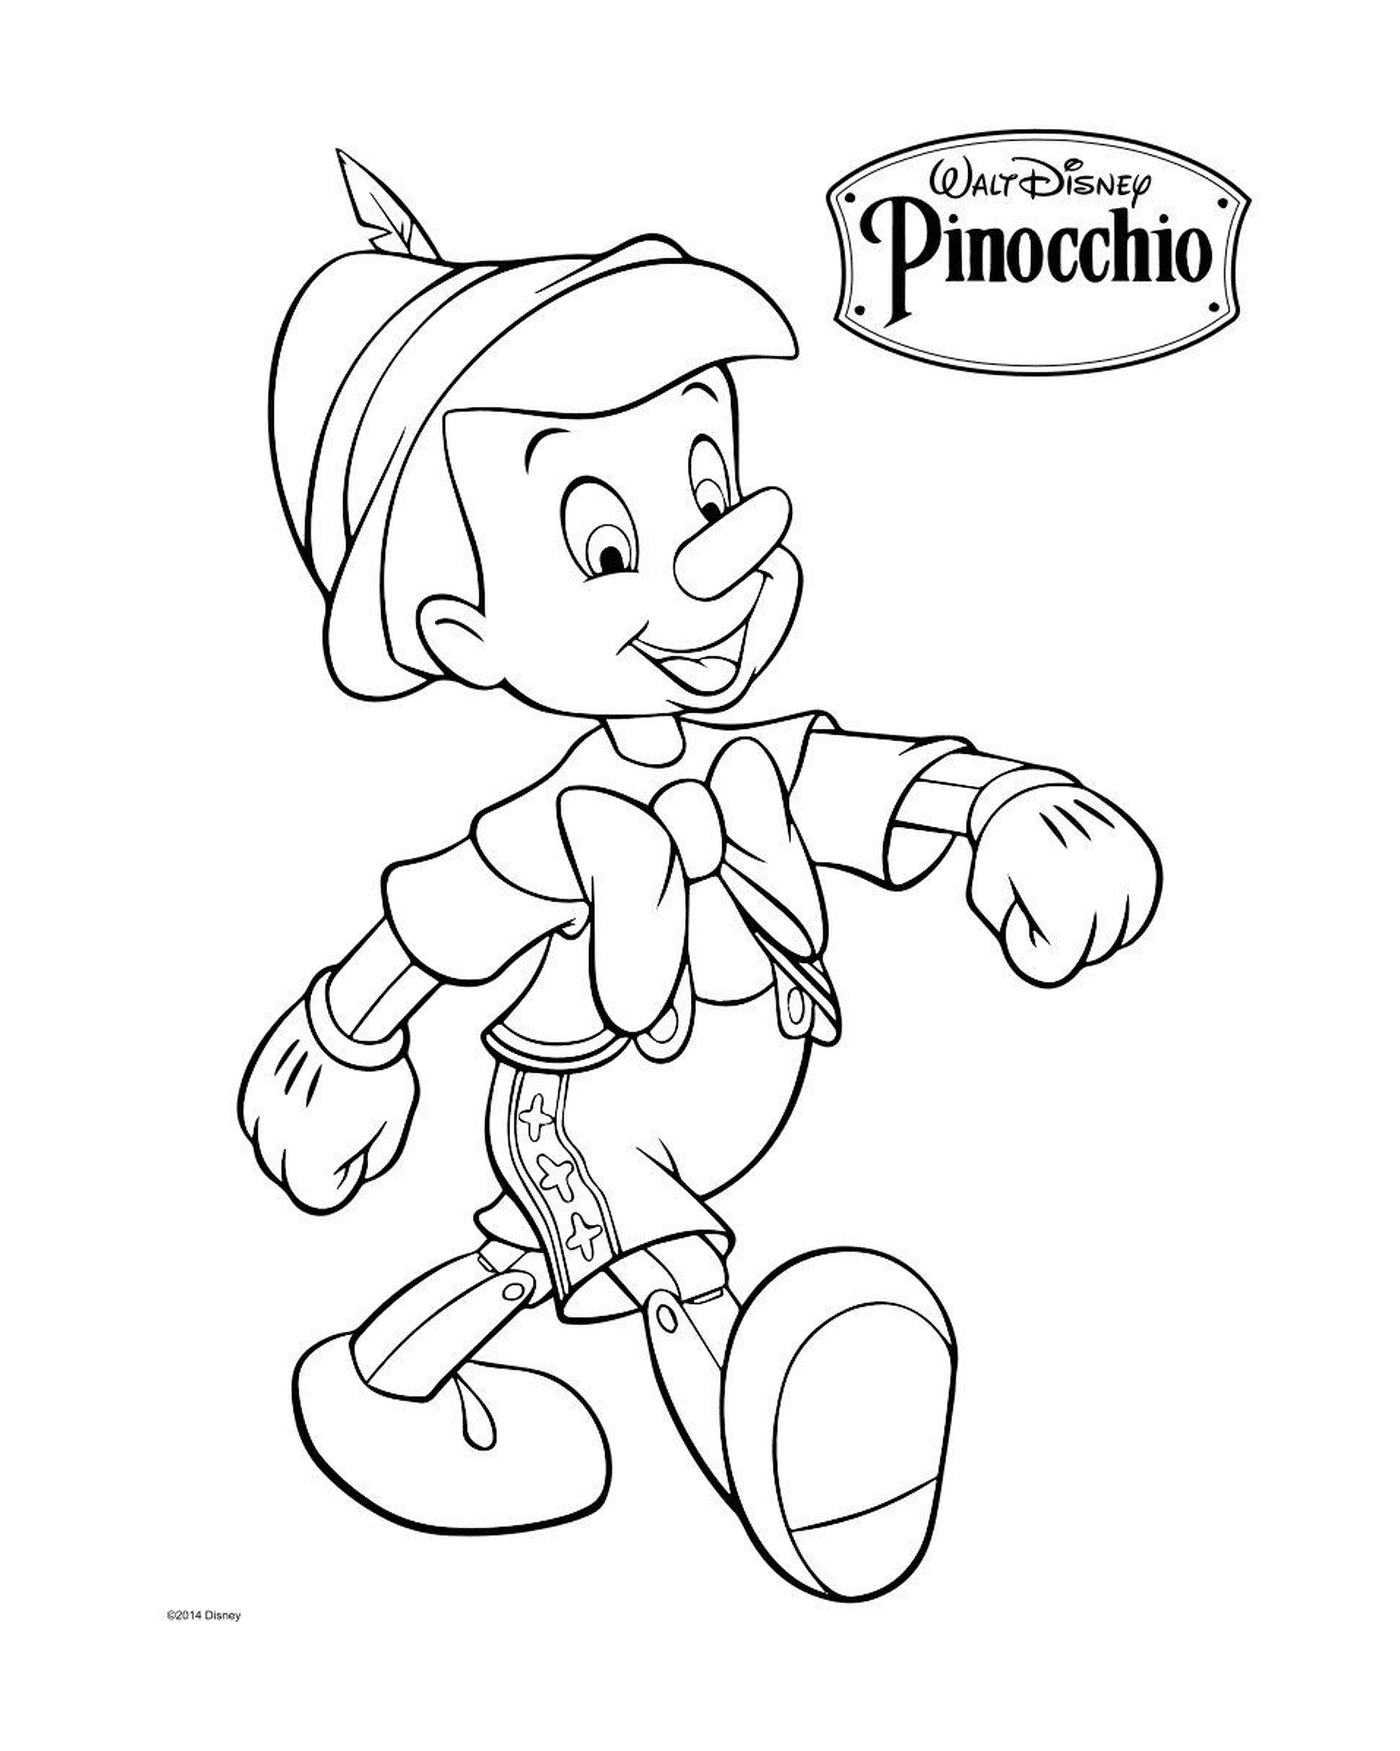  Geppetto, an Italian carpenter, manufactures a Pinocchio puppet 